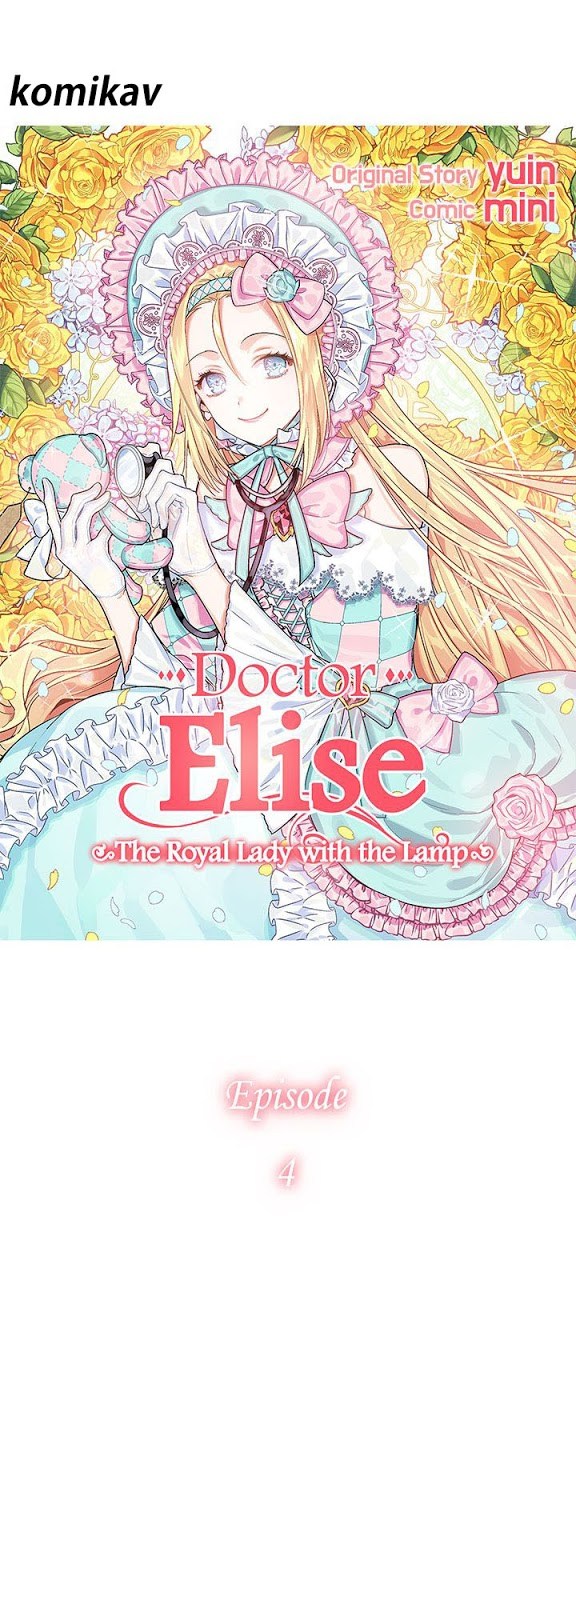 Doctor Elise: The Royal Lady With the Lamp Chapter 4